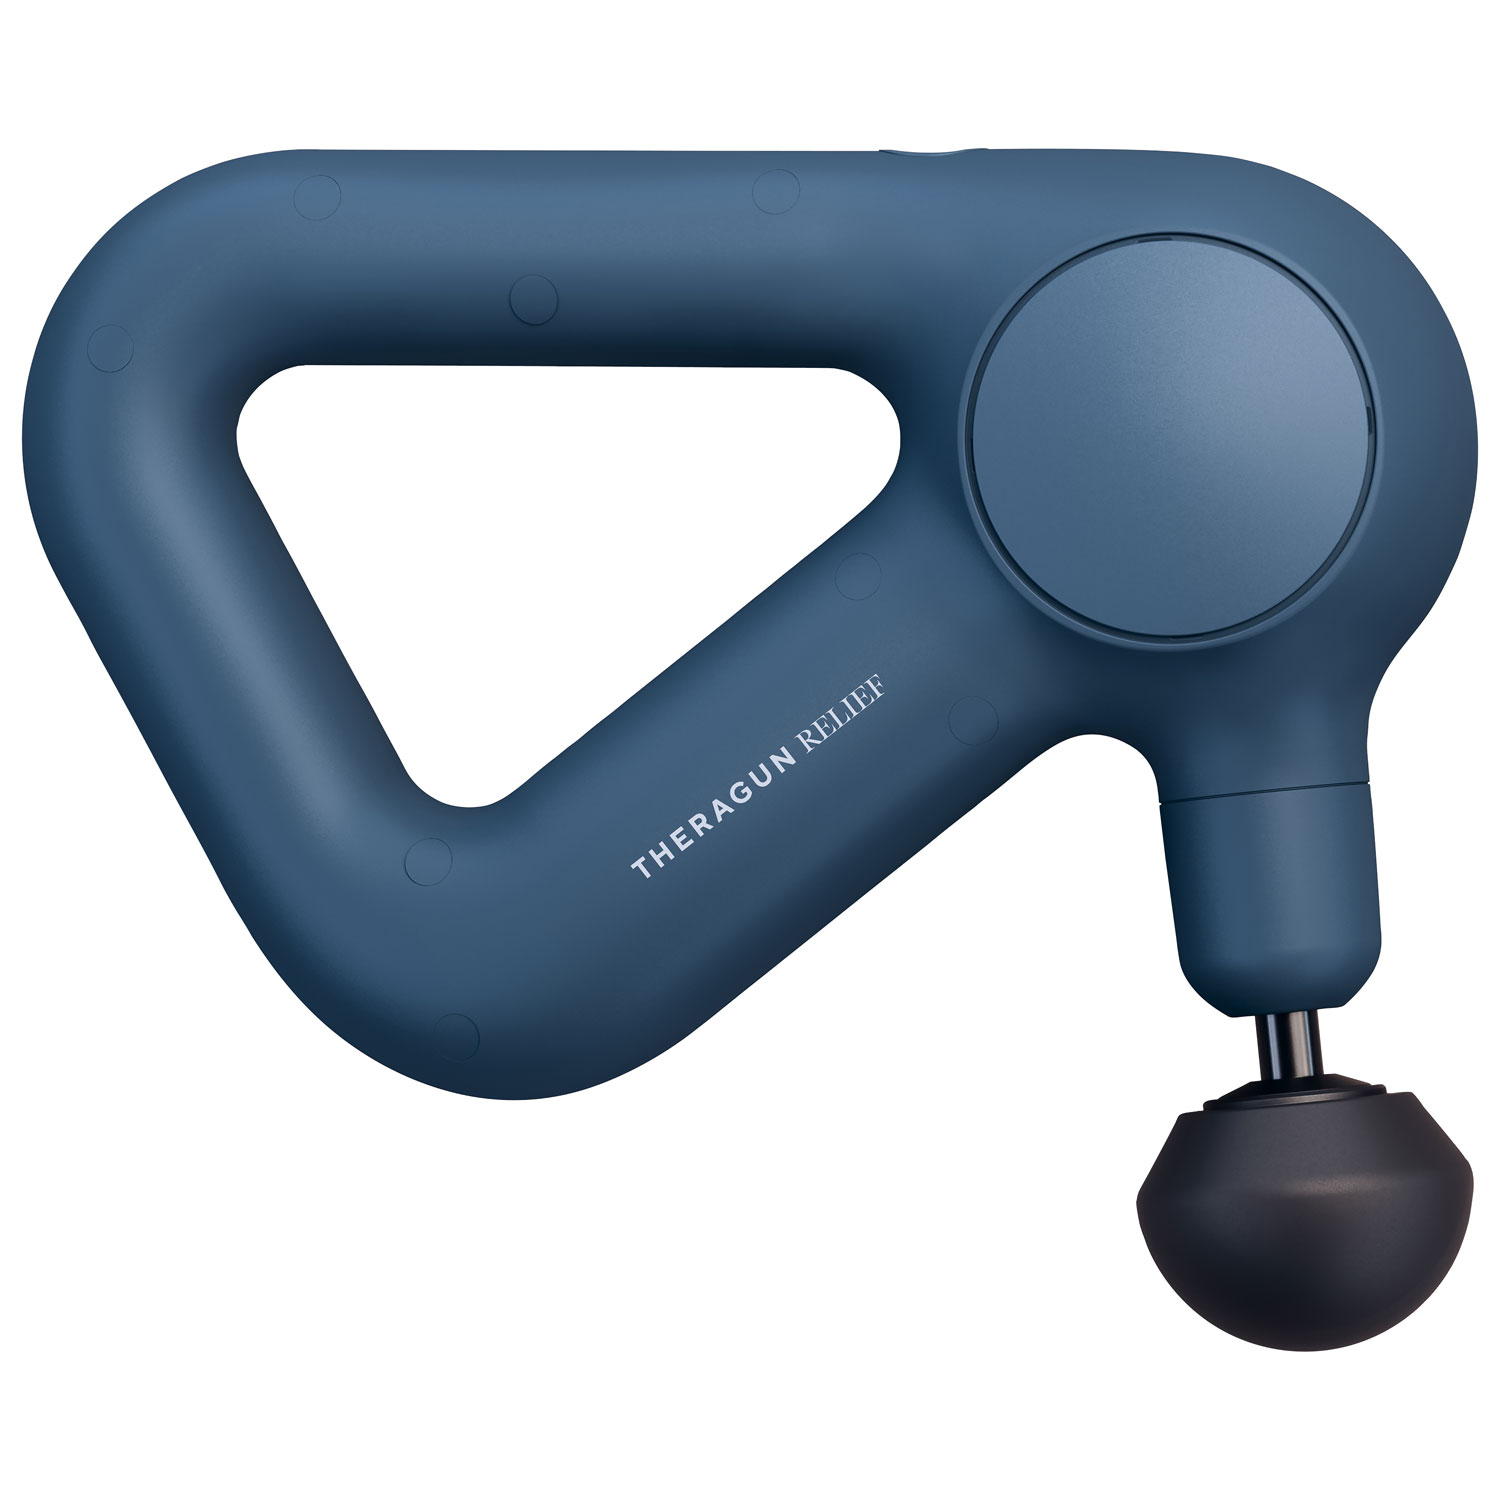 Therabody Theragun Relief Handheld Percussive Massage Device - Blue